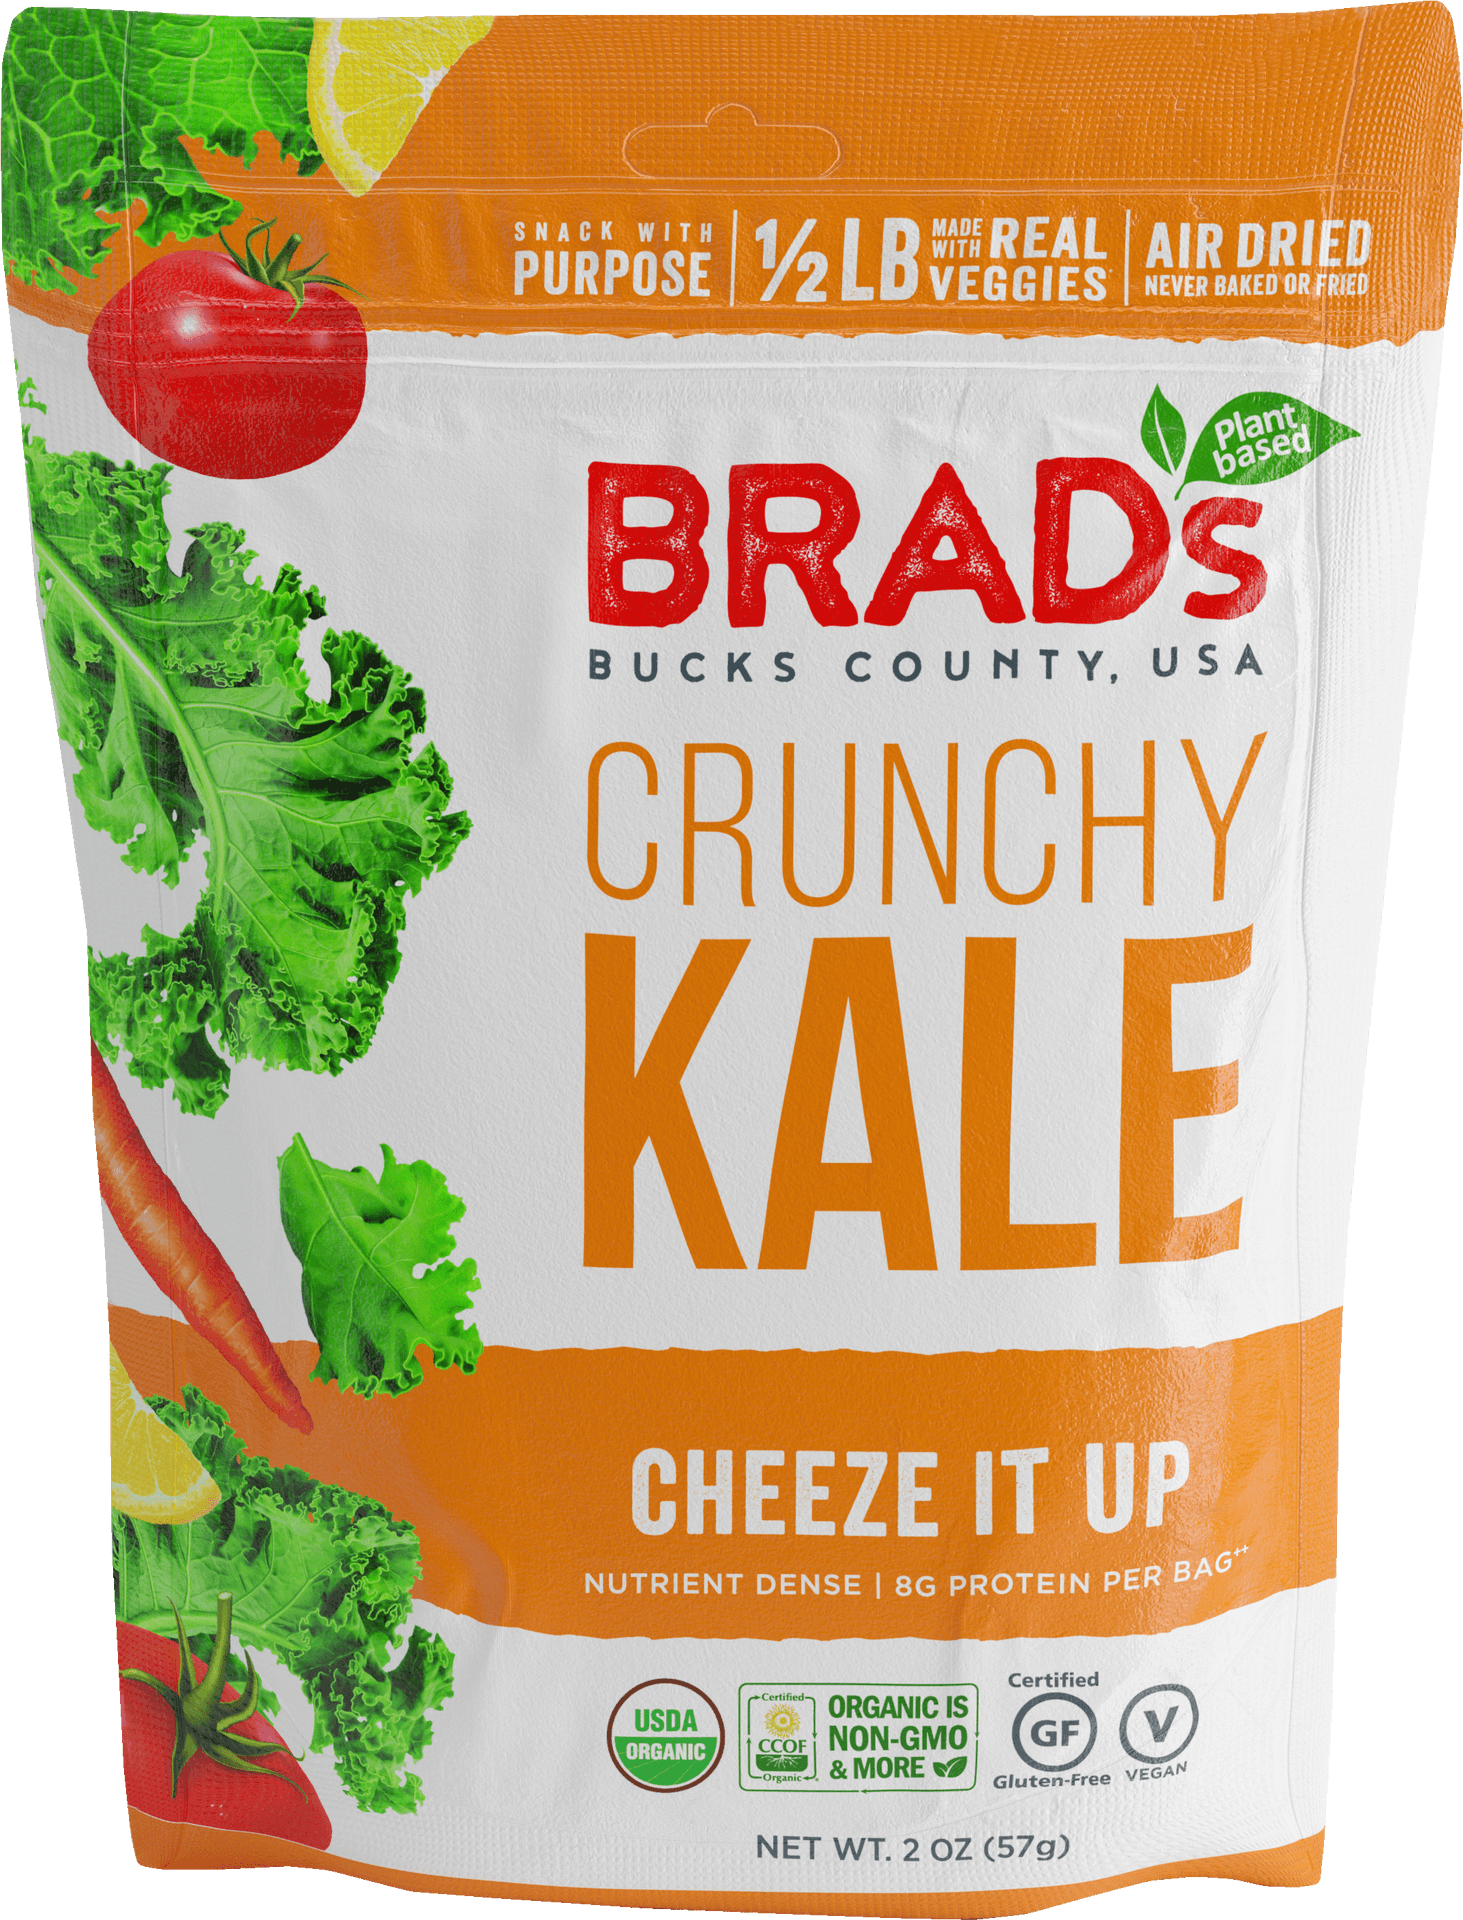 Brads Crunchy Kale Cheese Snack Package PNG image